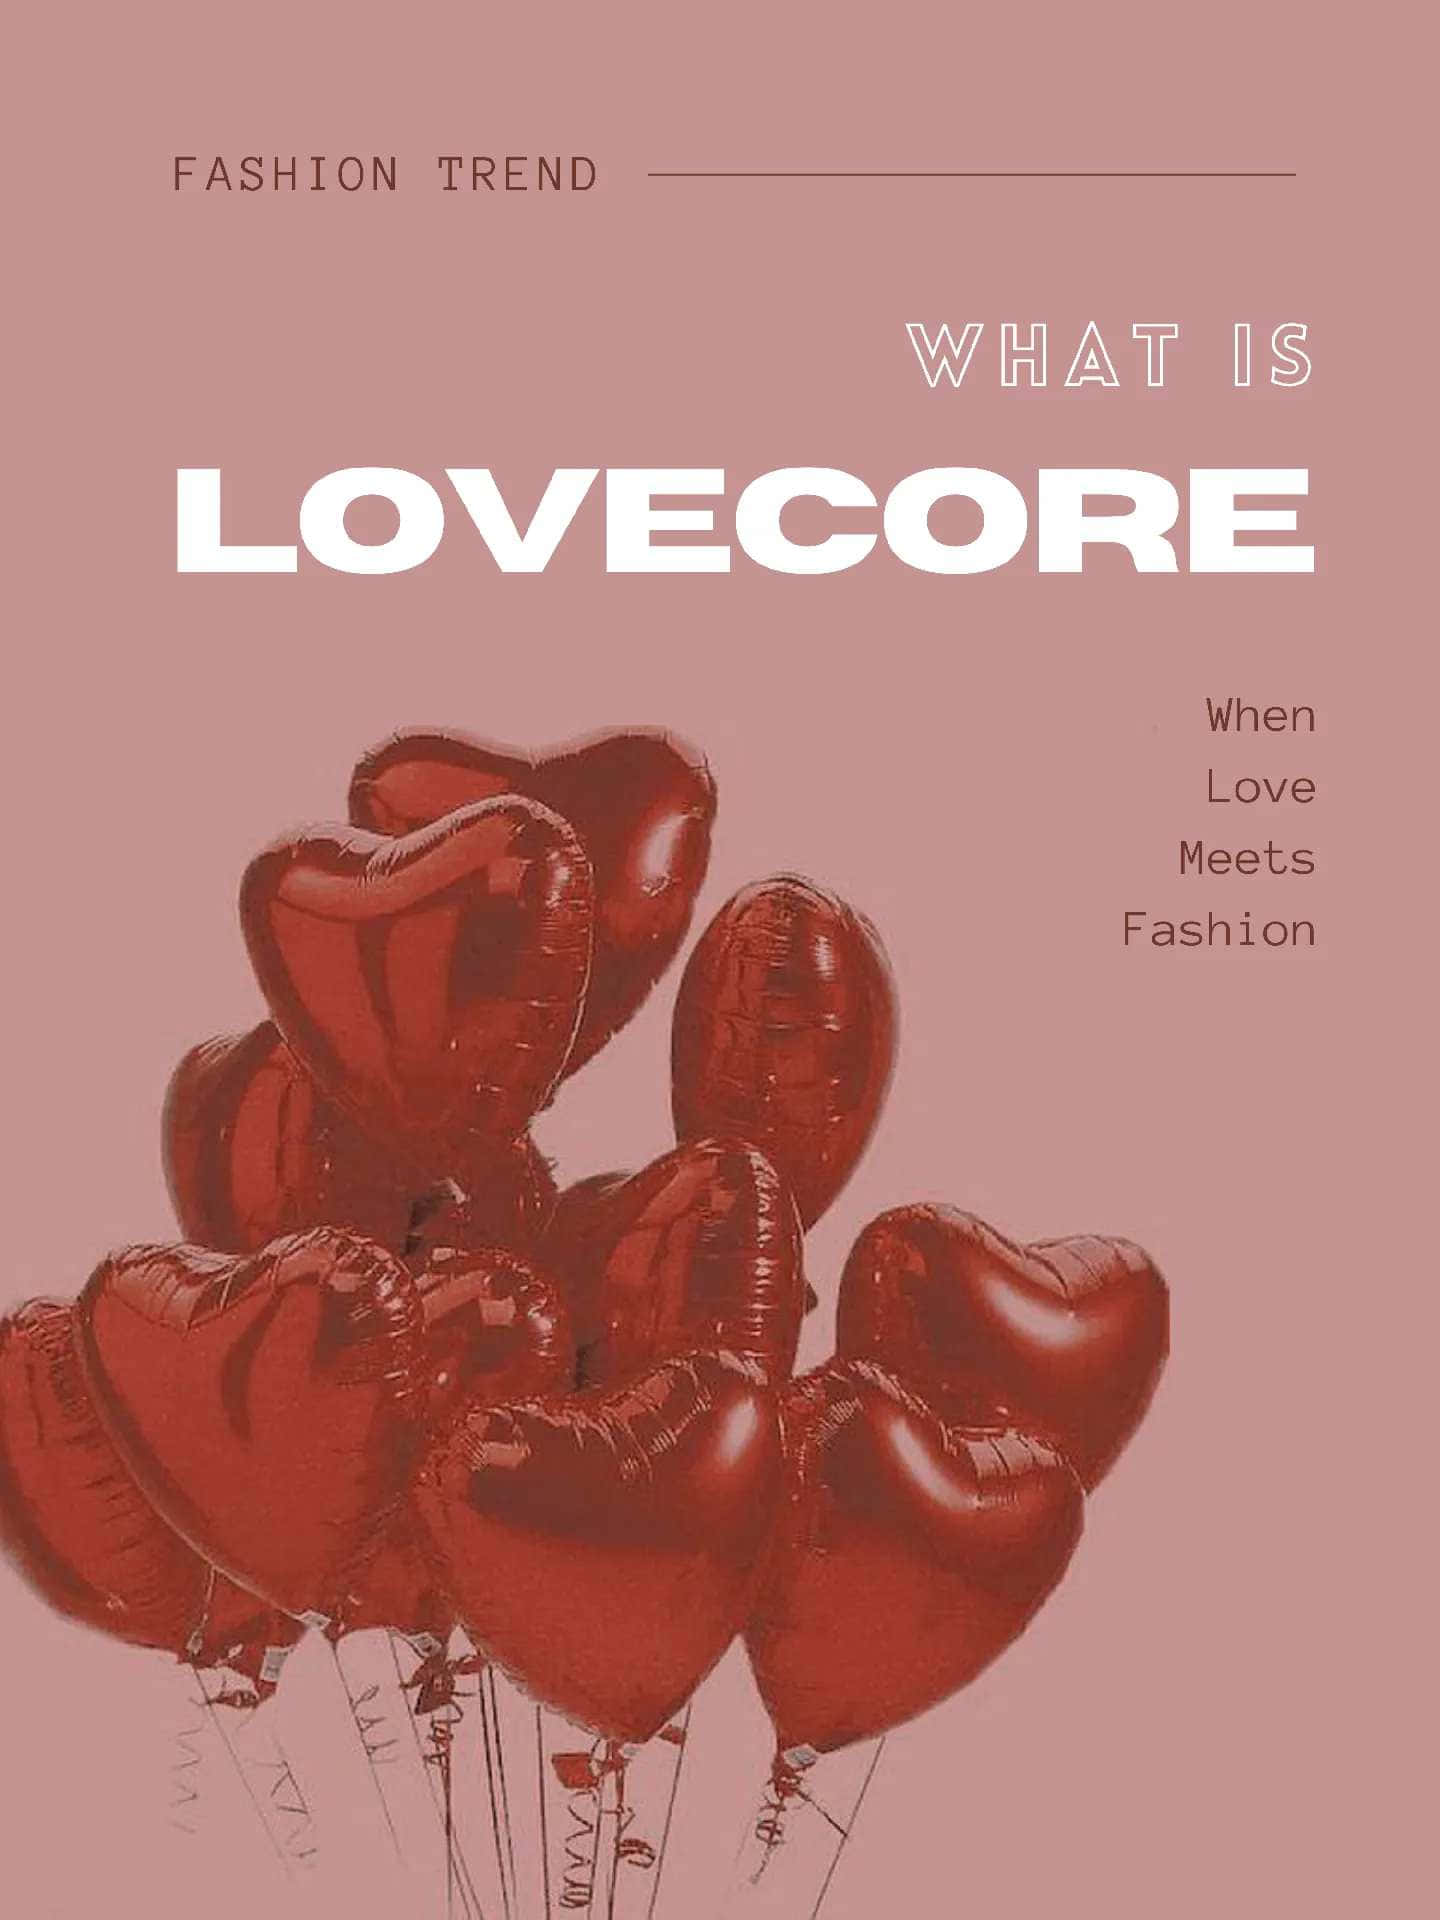 Lovecore Fashion Trend Balloons Background